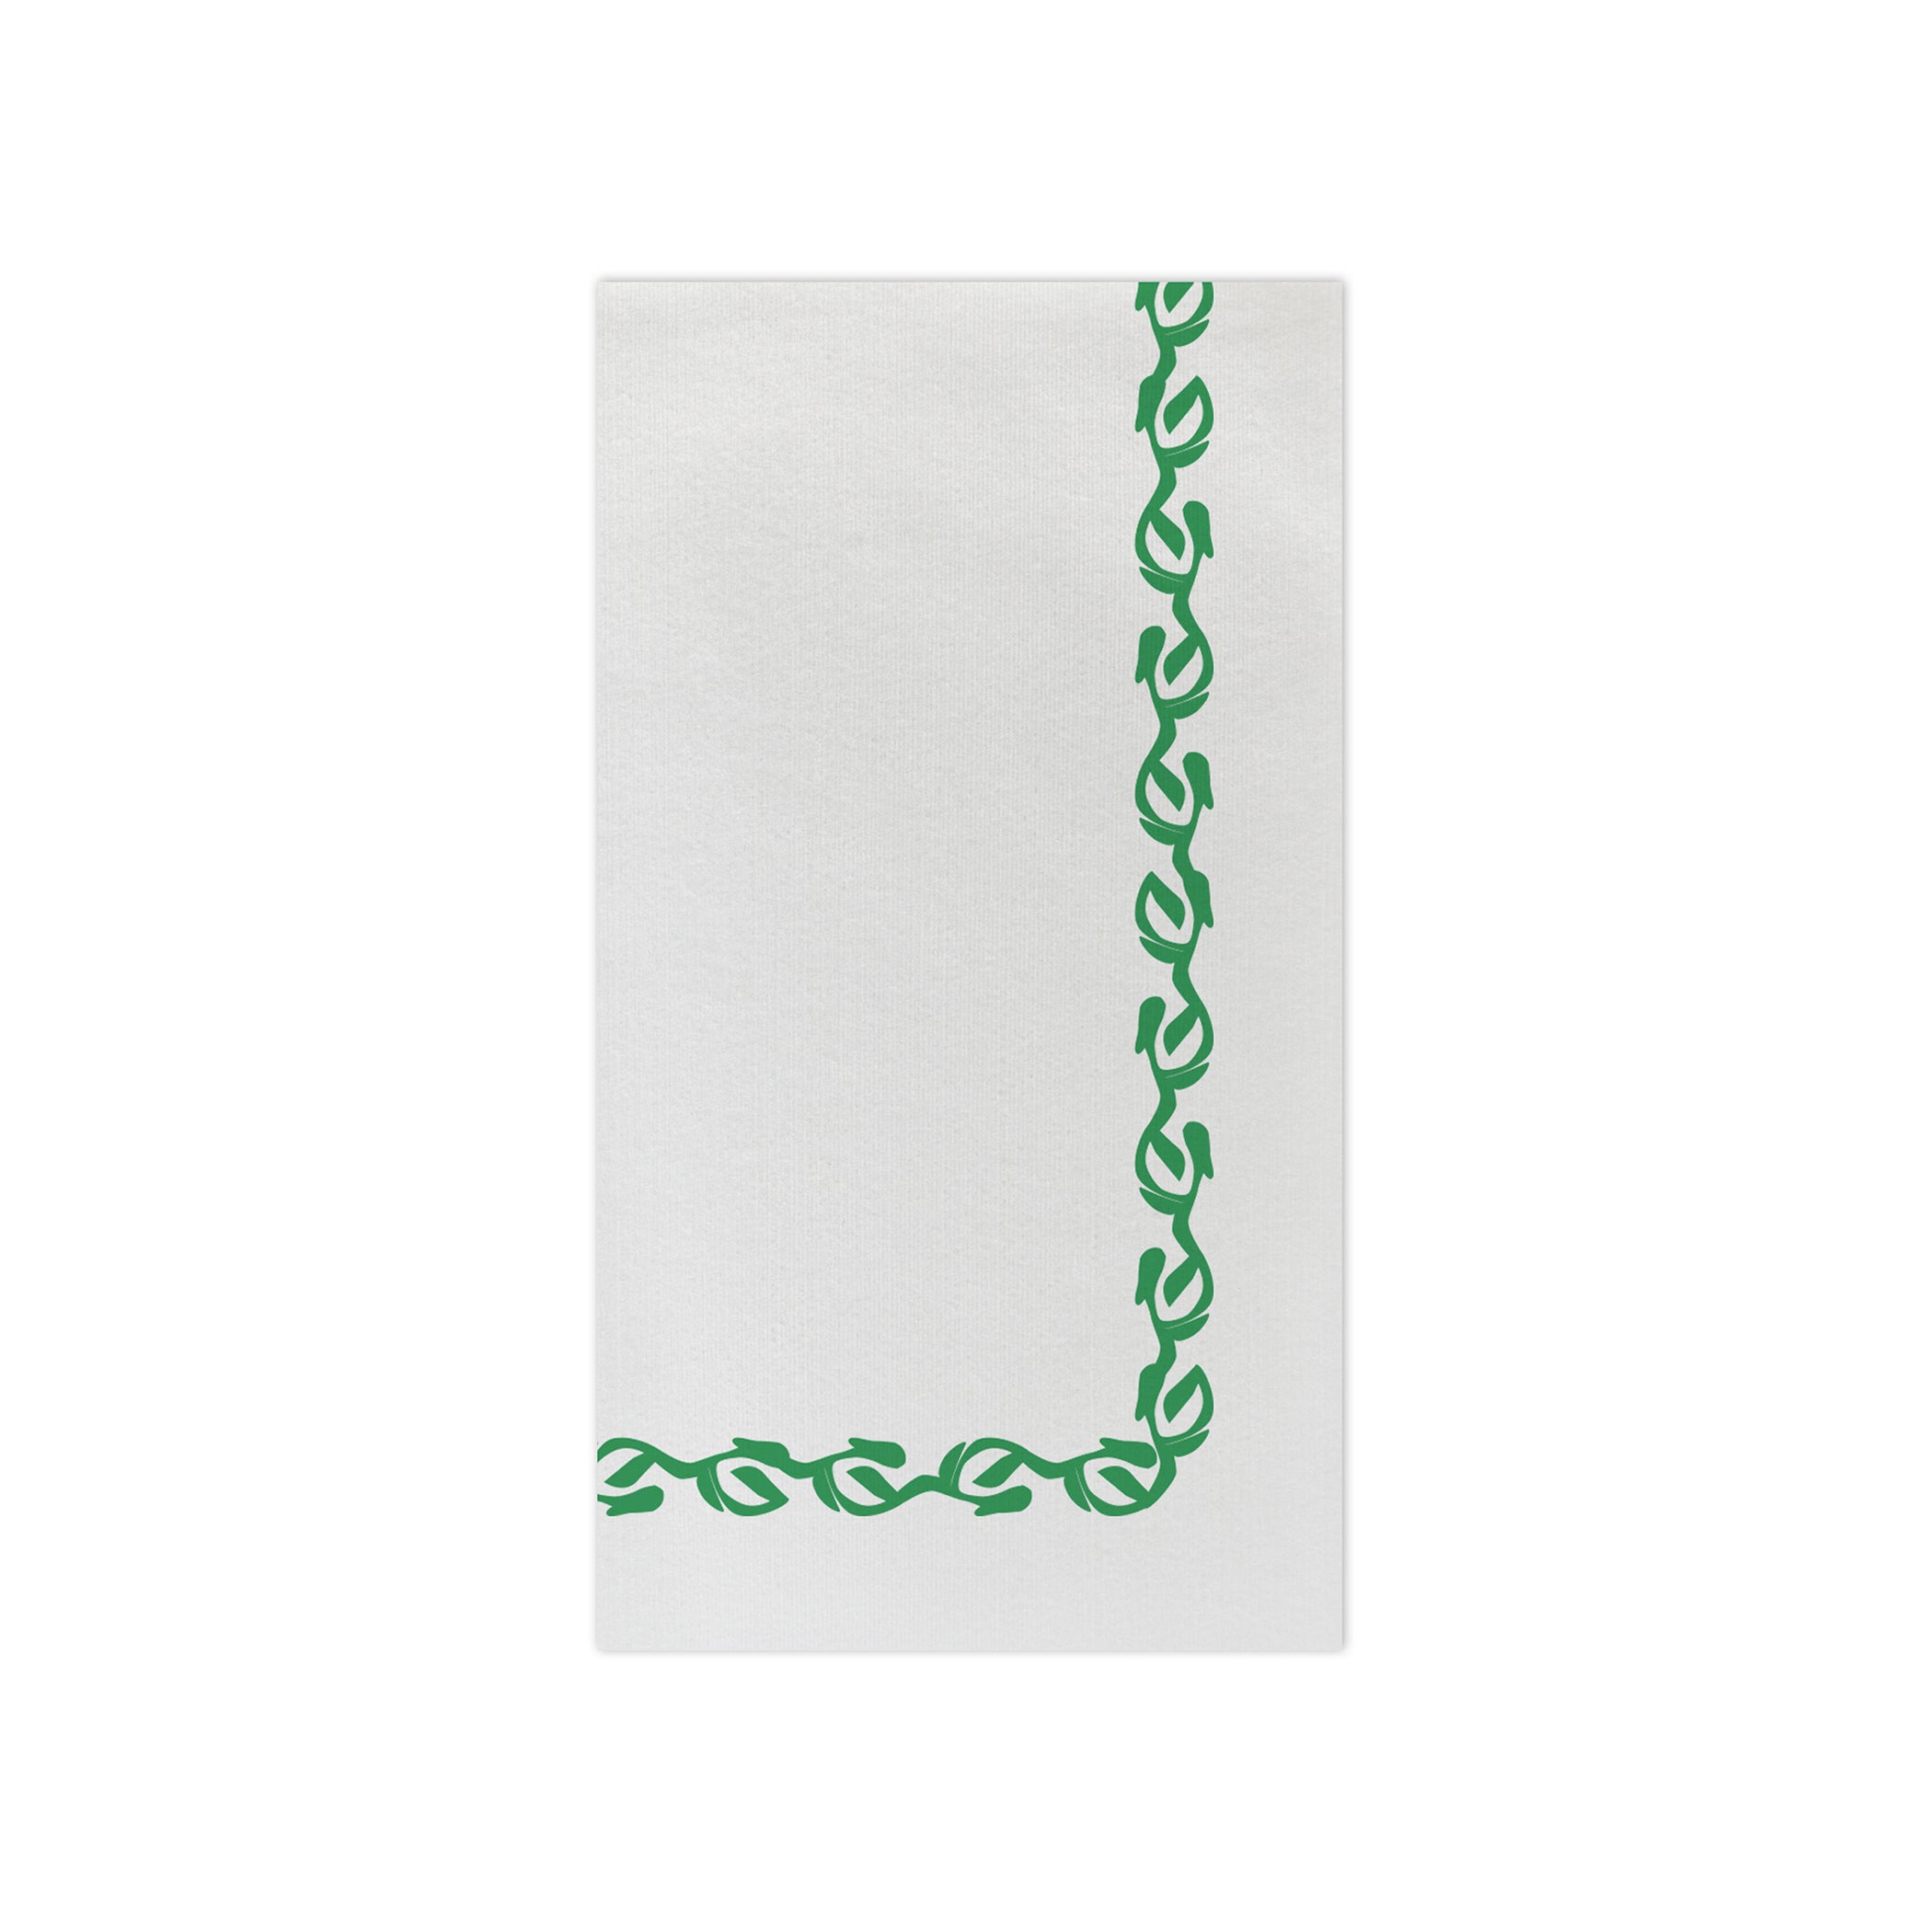 Papersoft Napkins Florentine Green Guest Towels - Pack of 20